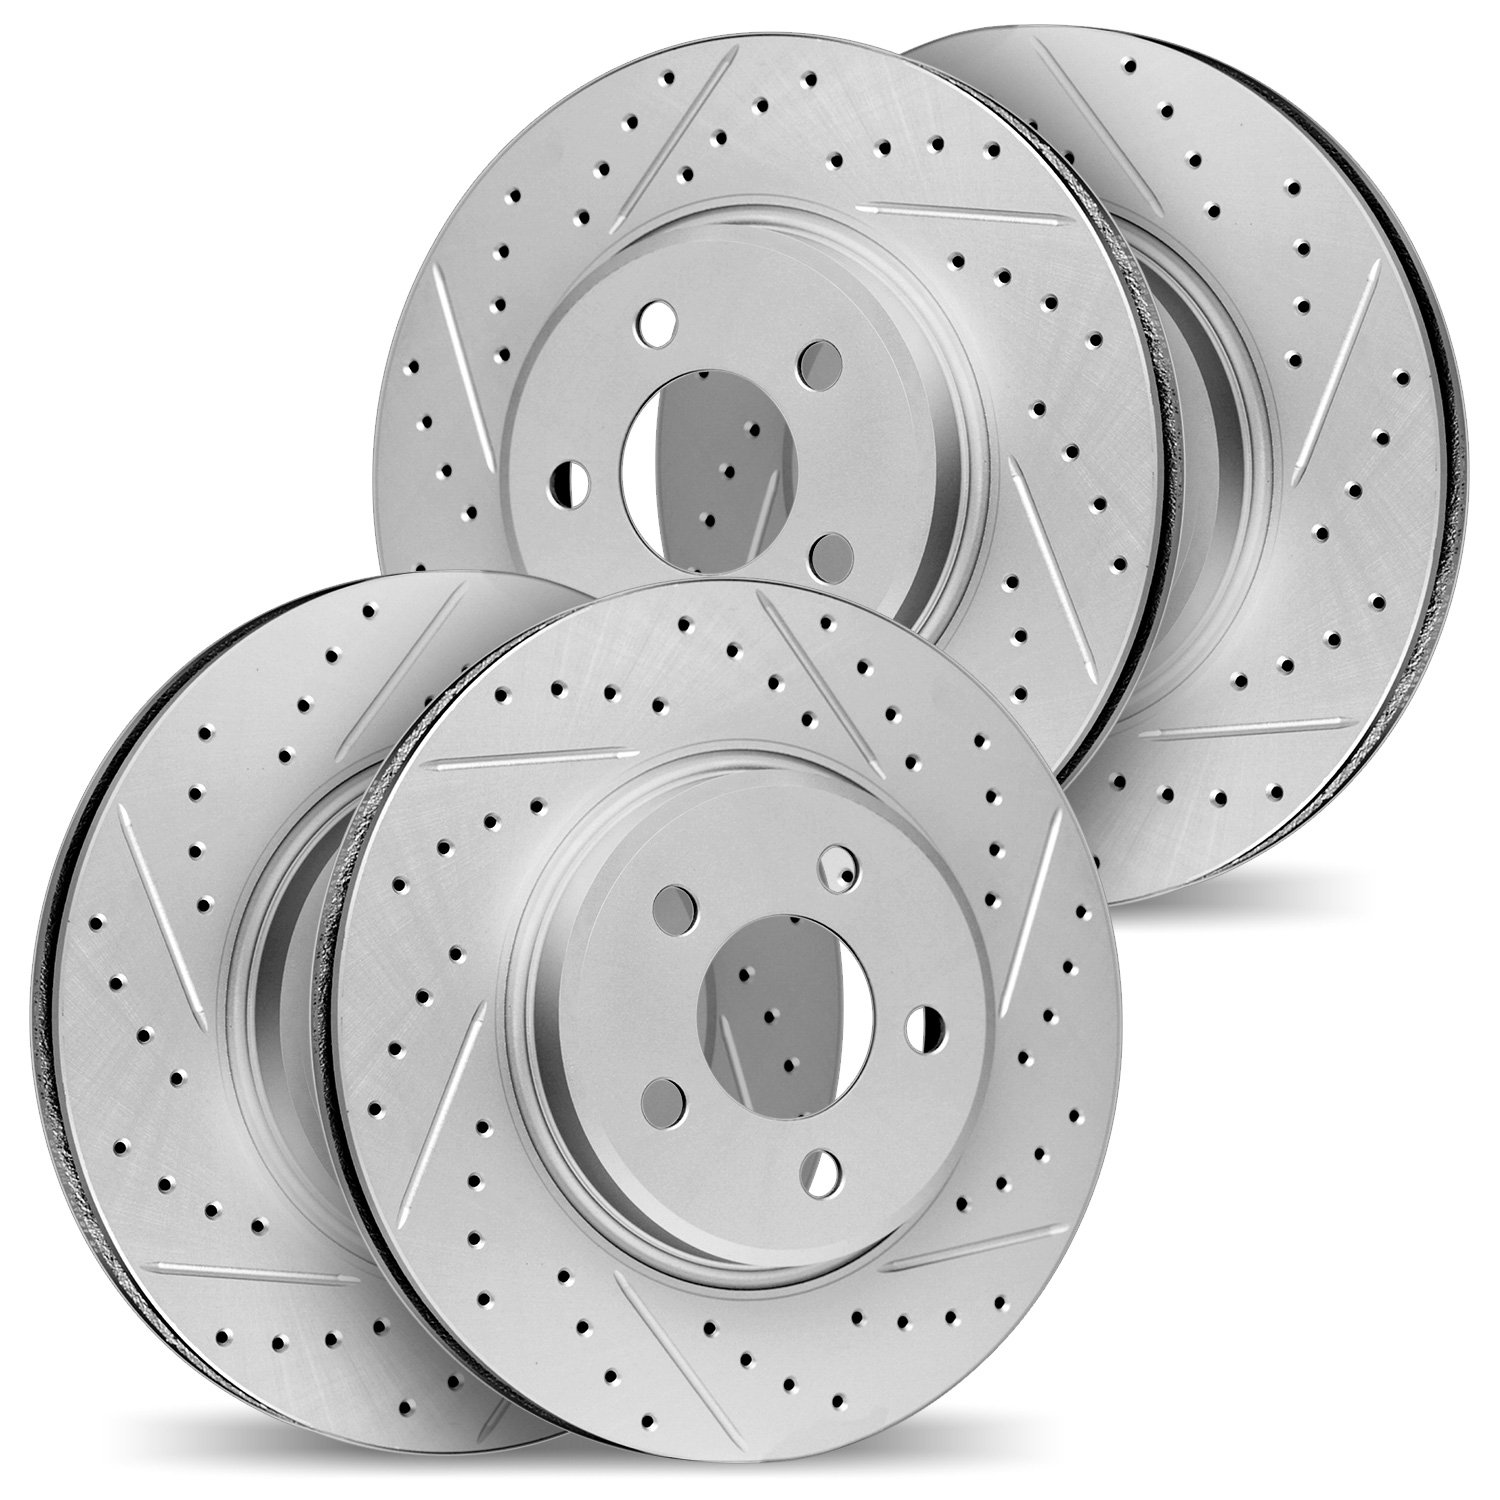 2004-31016 Geoperformance Drilled/Slotted Brake Rotors, 2007-2015 BMW, Position: Front and Rear